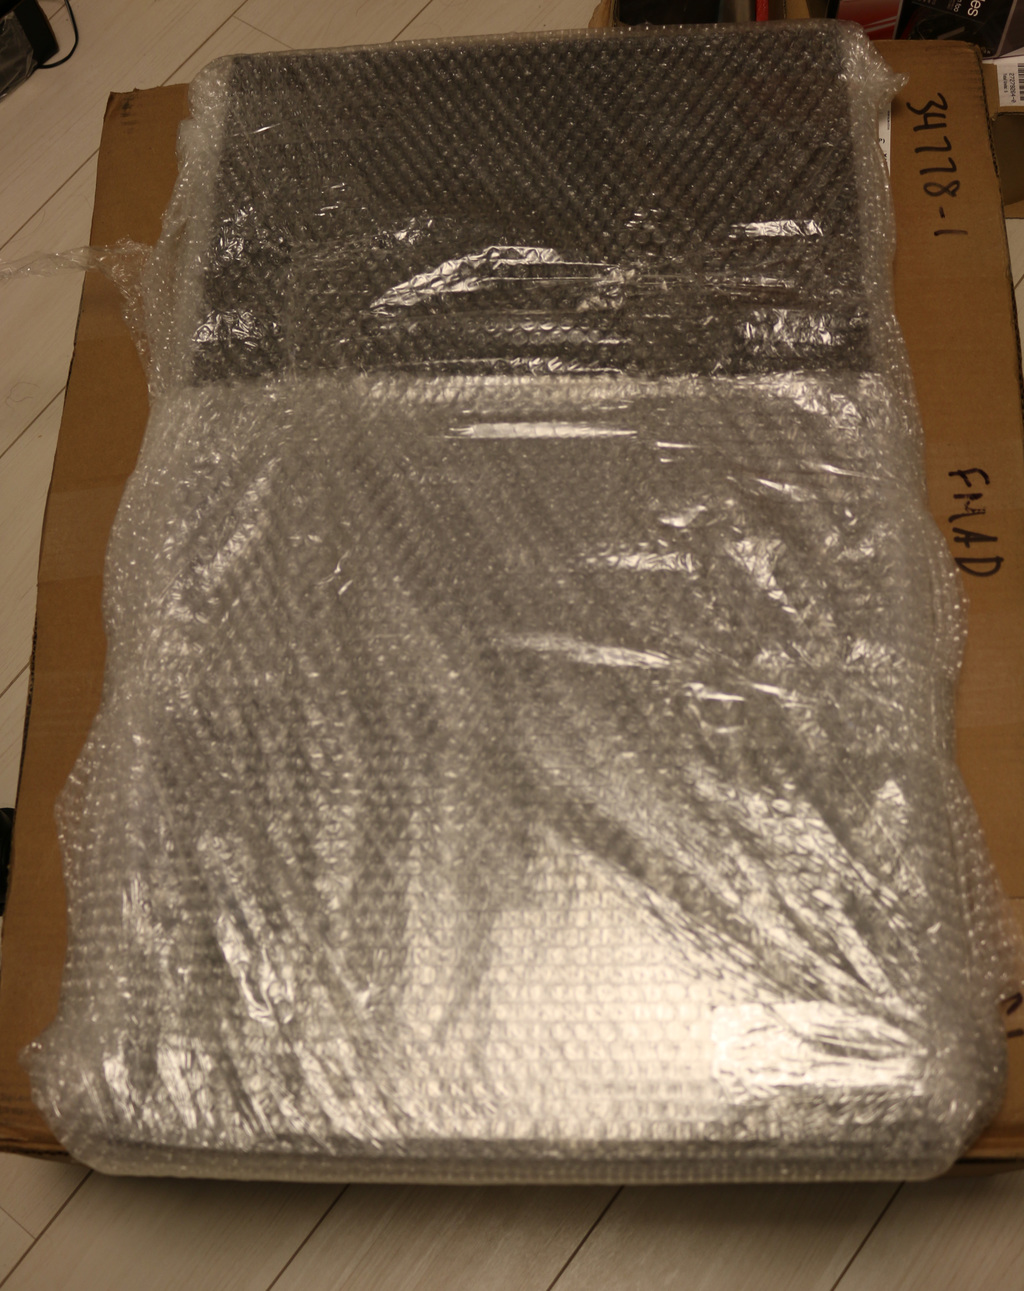 fmadio chassis number one bubble wrap